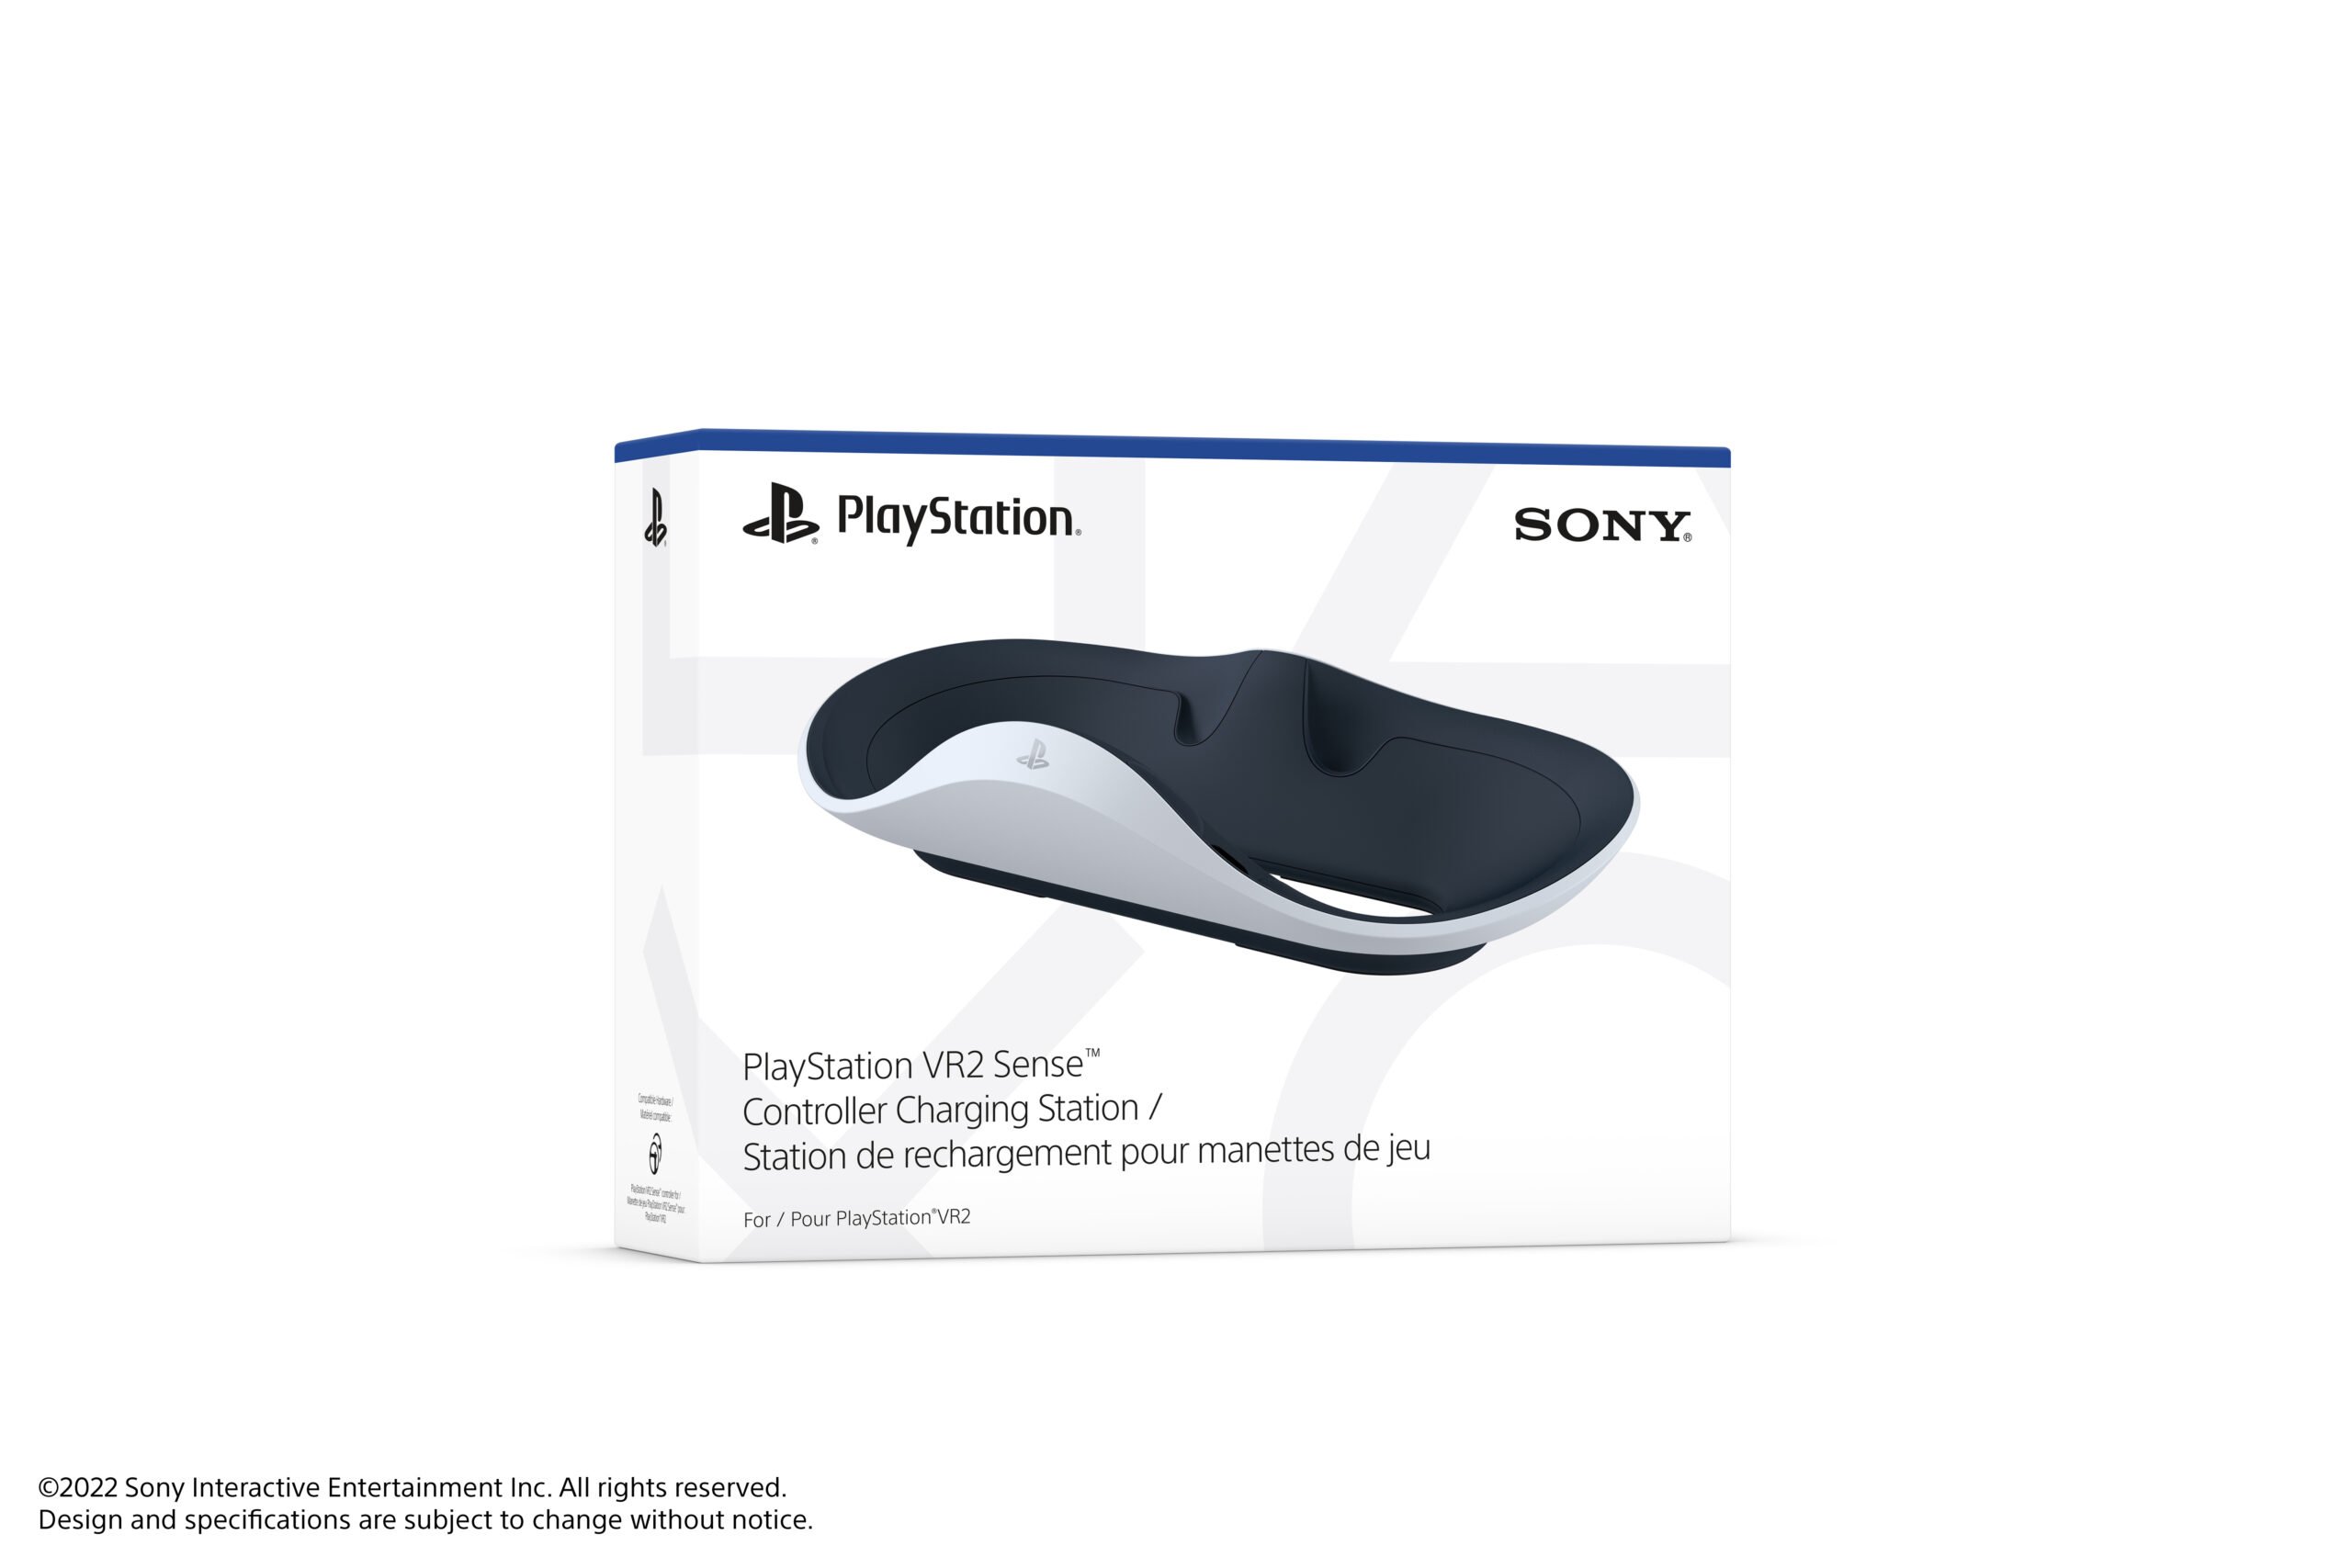 Forget the metaverse, Sony's PlayStation VR2 will make you a